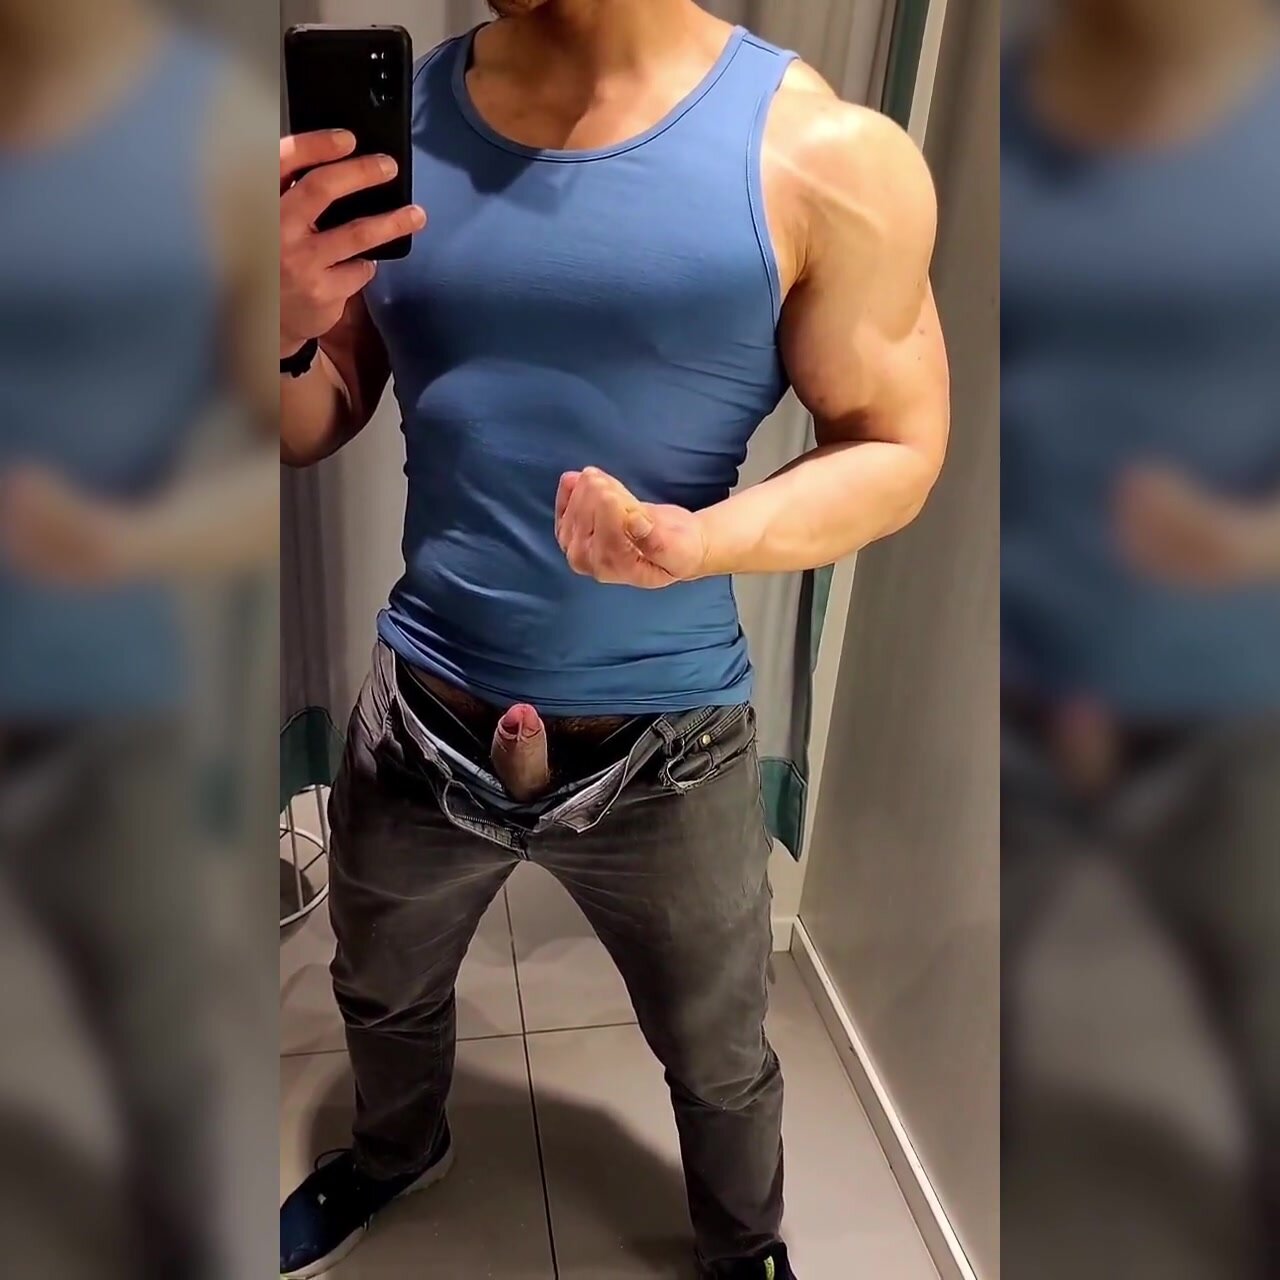 Roided musclebro in changing room